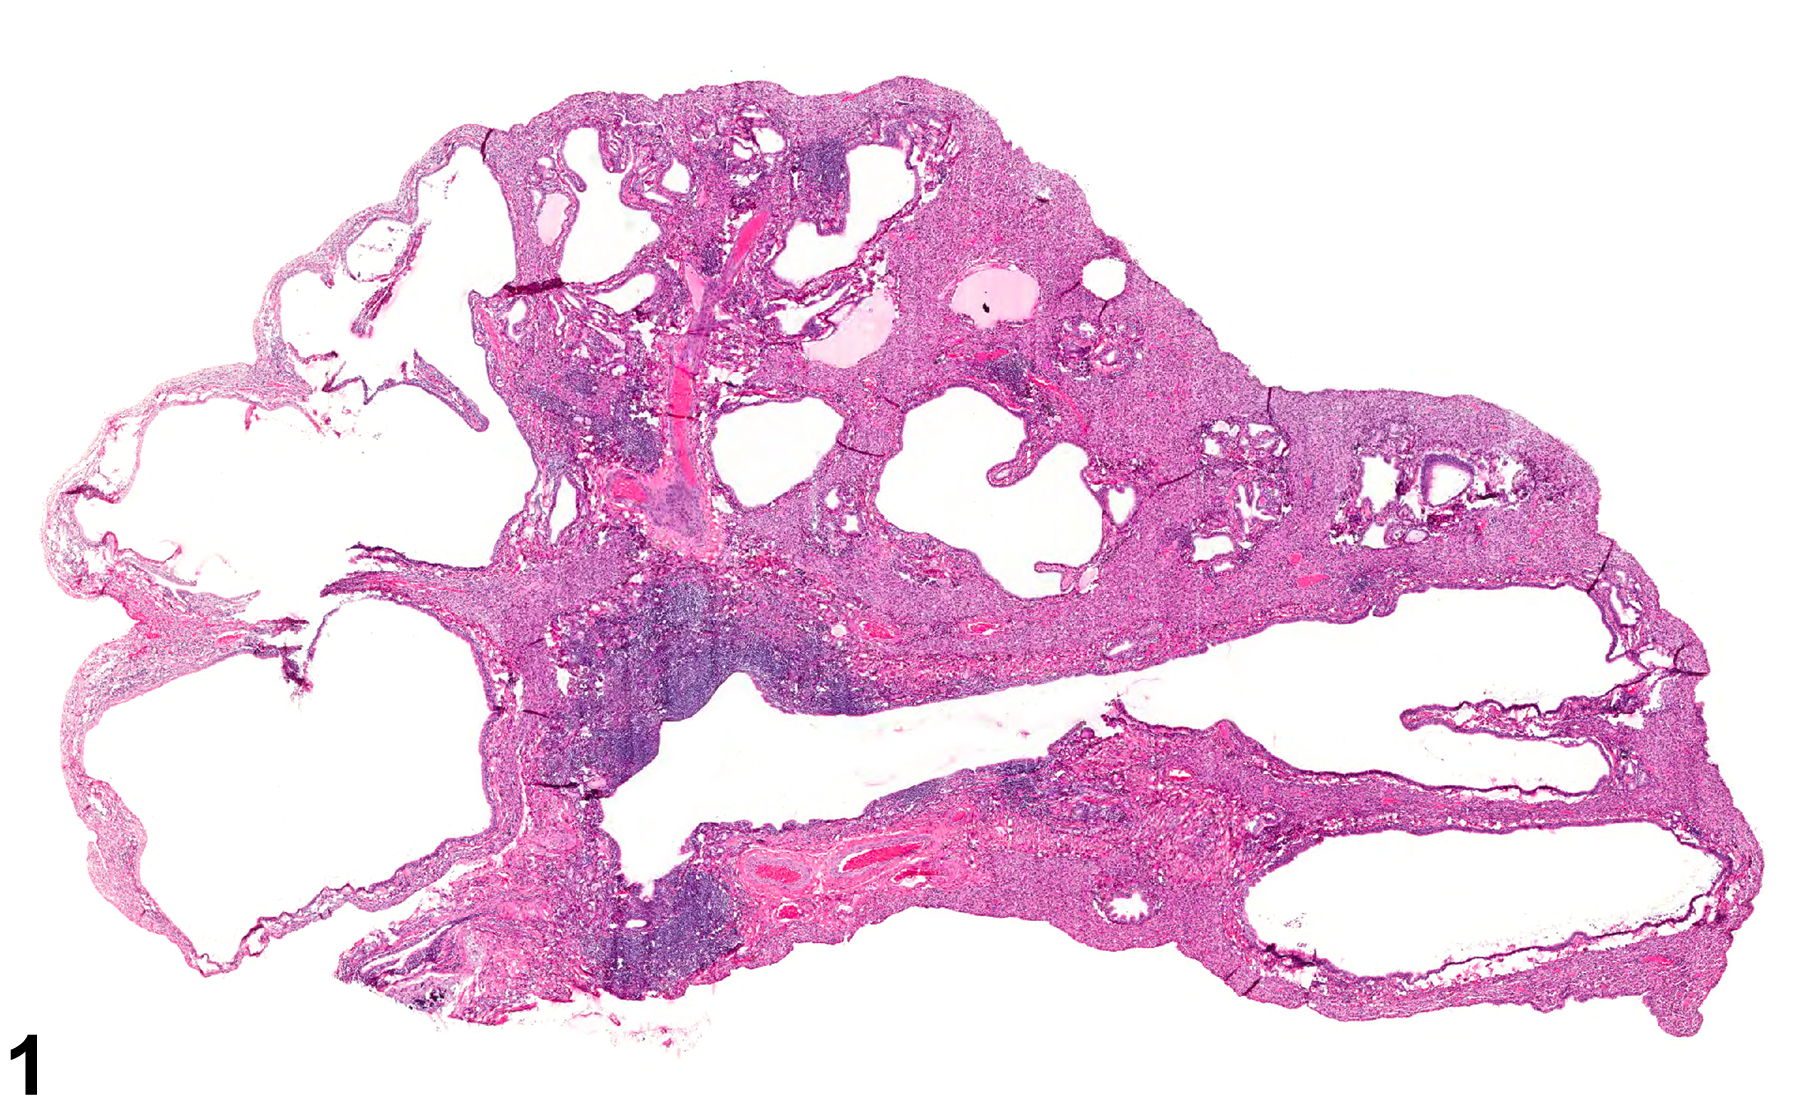 Image of bronchiectasis in the lung from a male F344/N rat in a chronic study